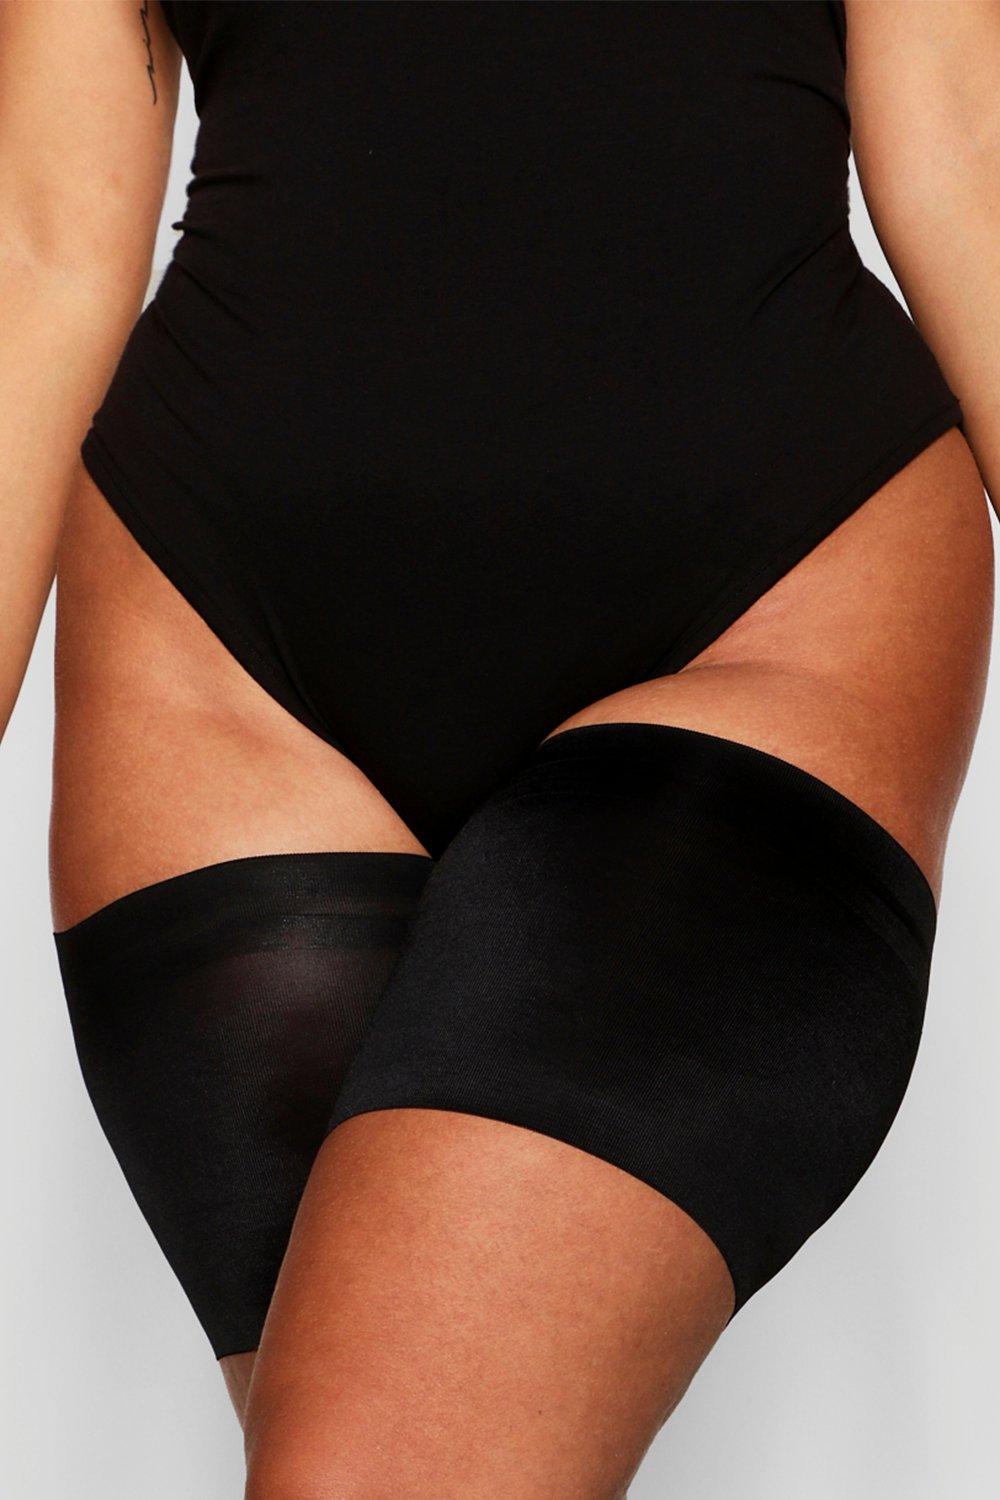 Boohoo Plus 2 Pack Anti Chafing Thigh Bands- Black  - Size: 24